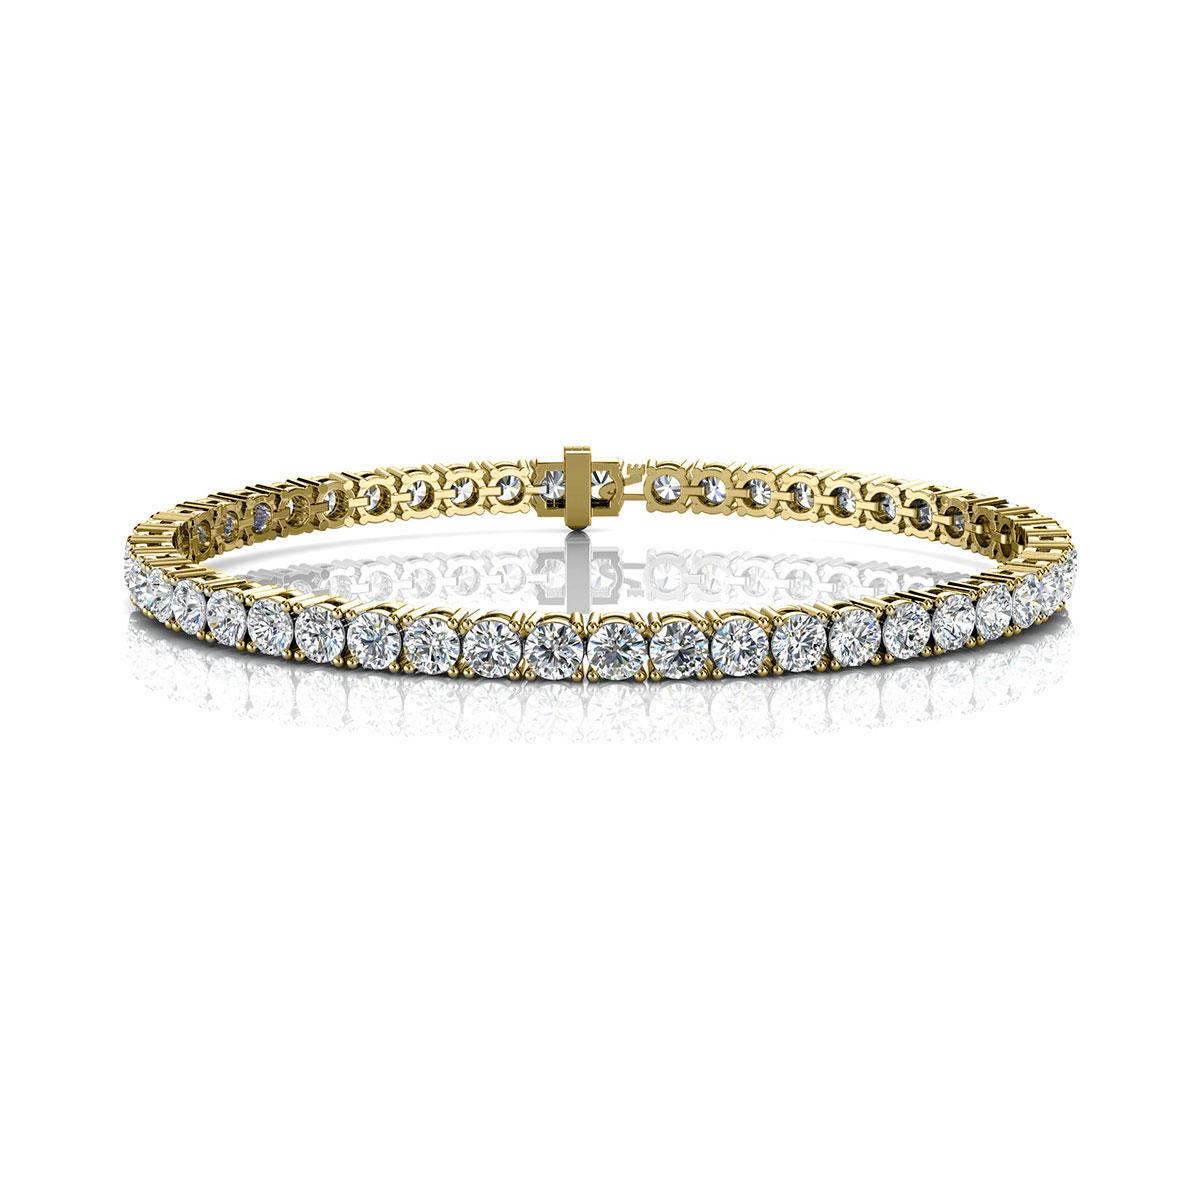 A timeless four prongs diamonds tennis bracelet. Experience the Difference!

Product details: 

Center Gemstone Type: NATURAL DIAMOND
Center Gemstone Color: WHITE
Center Gemstone Shape: ROUND
Center Diamond Carat Weight: 7
Metal: 14K Yellow